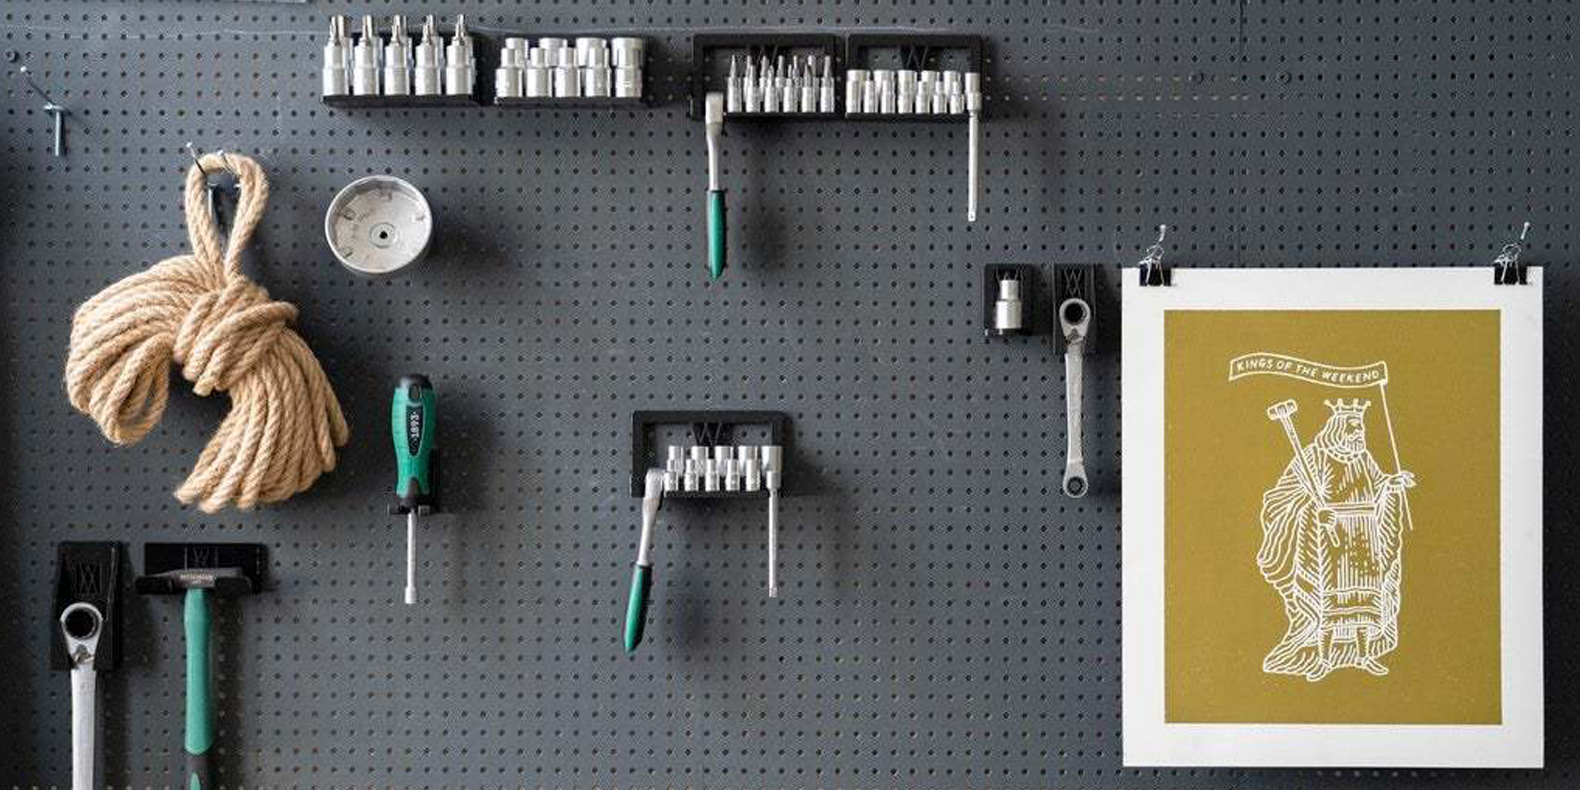 Here is a selection of the best 3D printable STL files for 3D printer to organize your pegboard